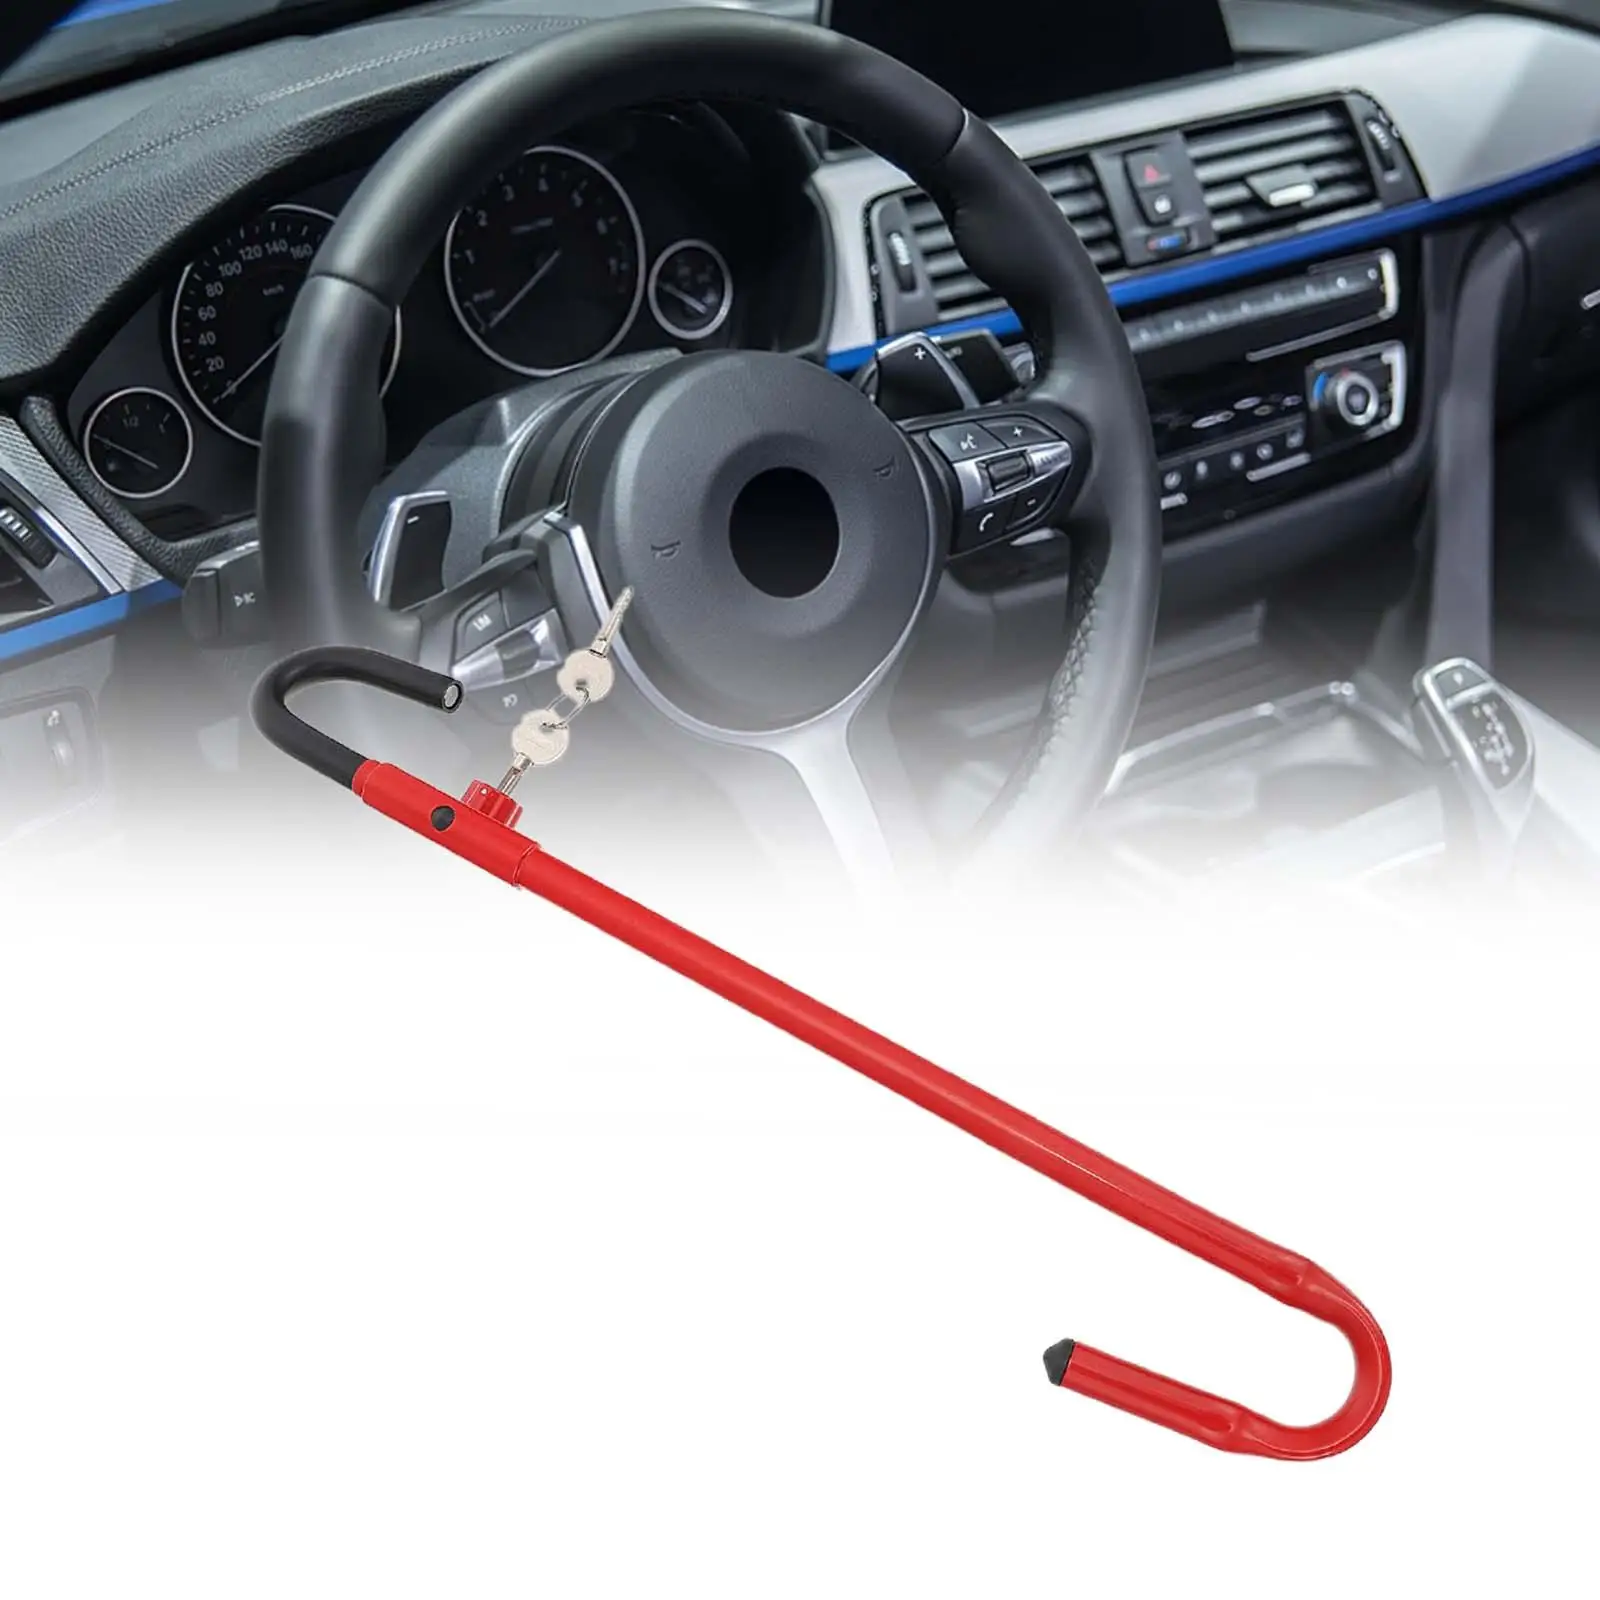 Car Steering Wheel to Brake Pedal Lock Durable with 2Pcs Keys Sturdy Accessory